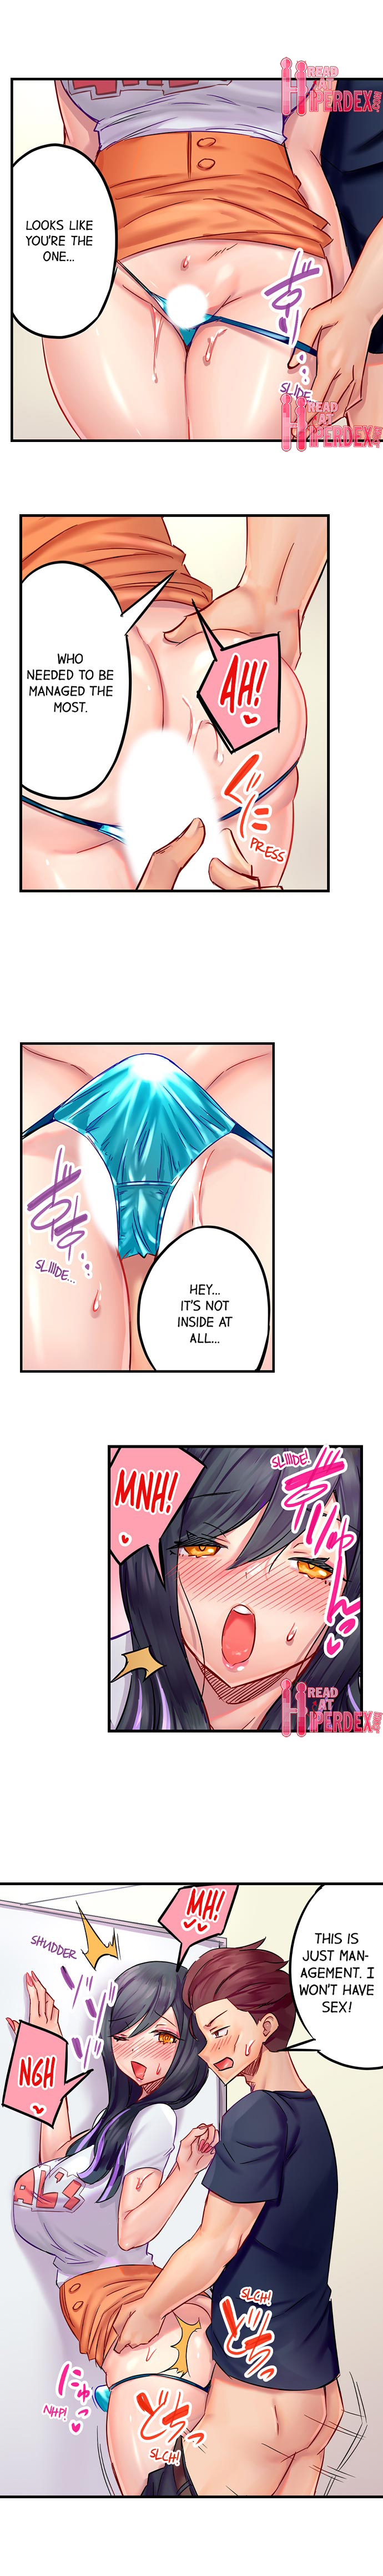 Orgasm Management for This Tanned Girl - Chapter 6 Page 3